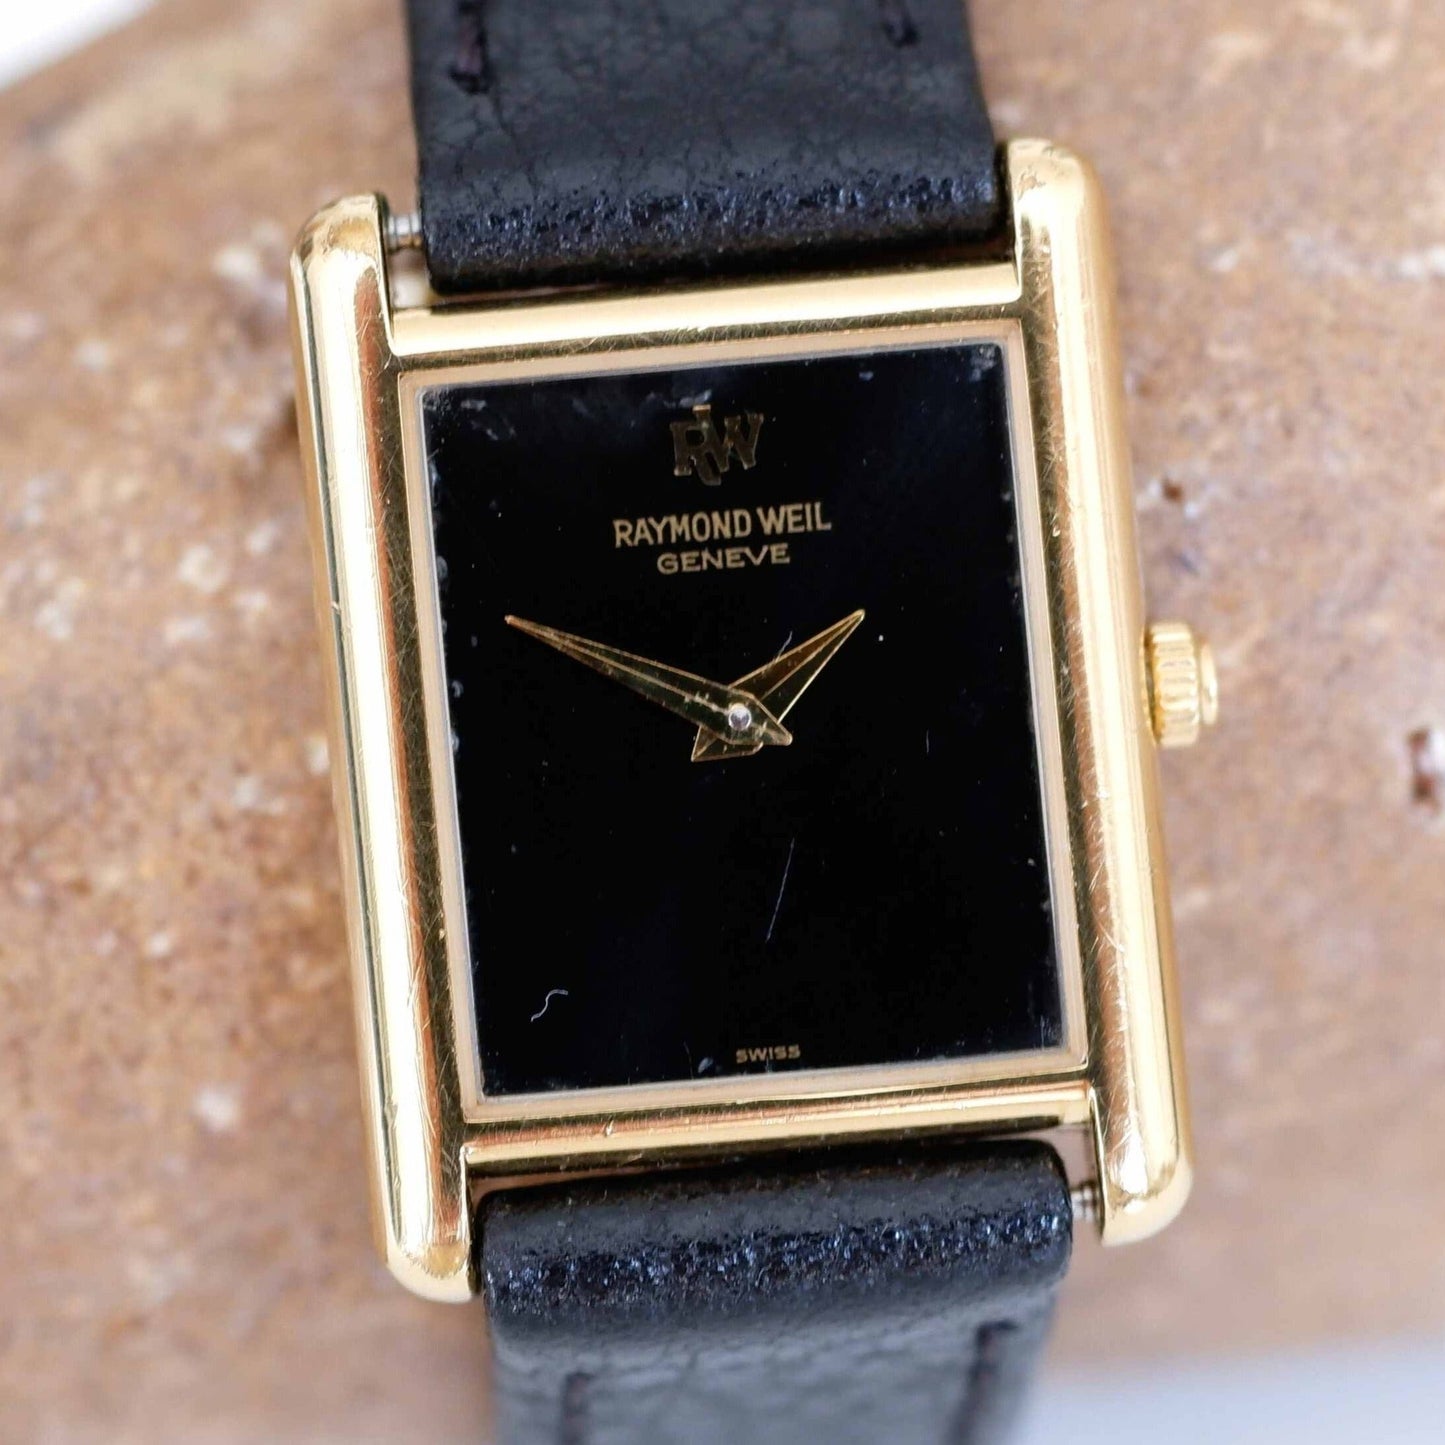 Raymond Weil Vintage Ladies Watch: 90s Golden Rectangular Style with Black Dial | Second Front Side